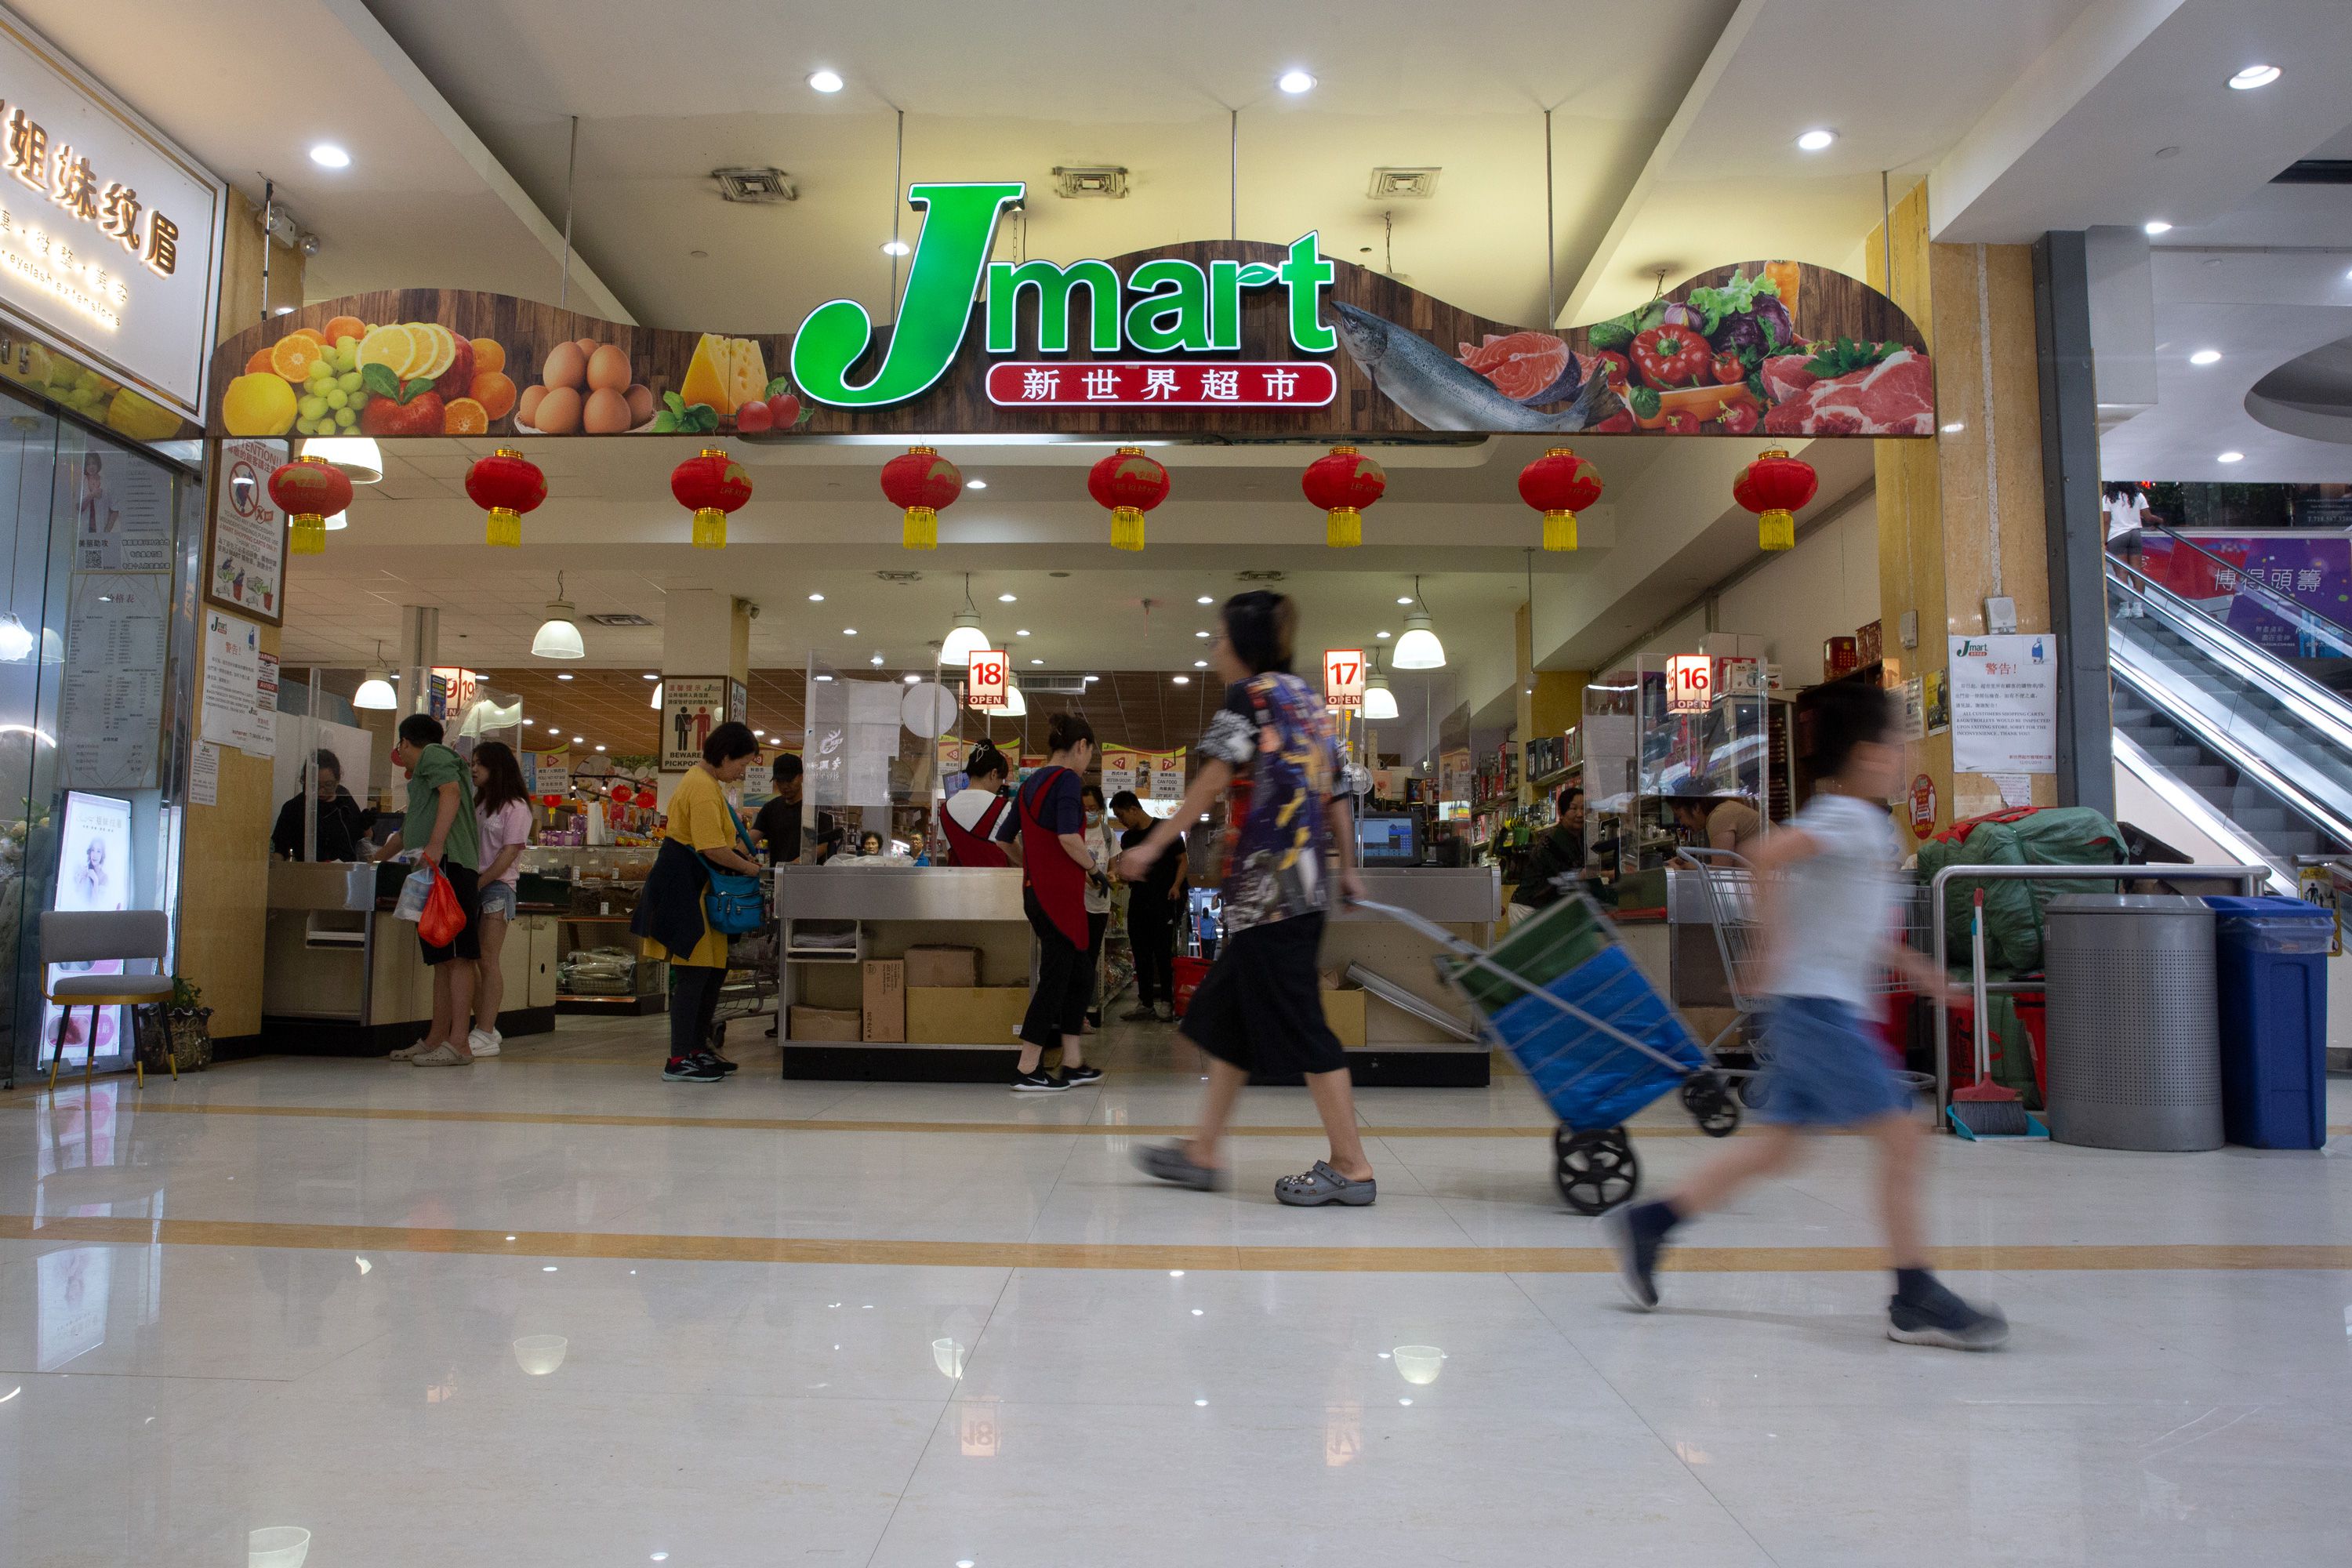 Shoppers get food at a Jmart in the New World Mall in Flushing.